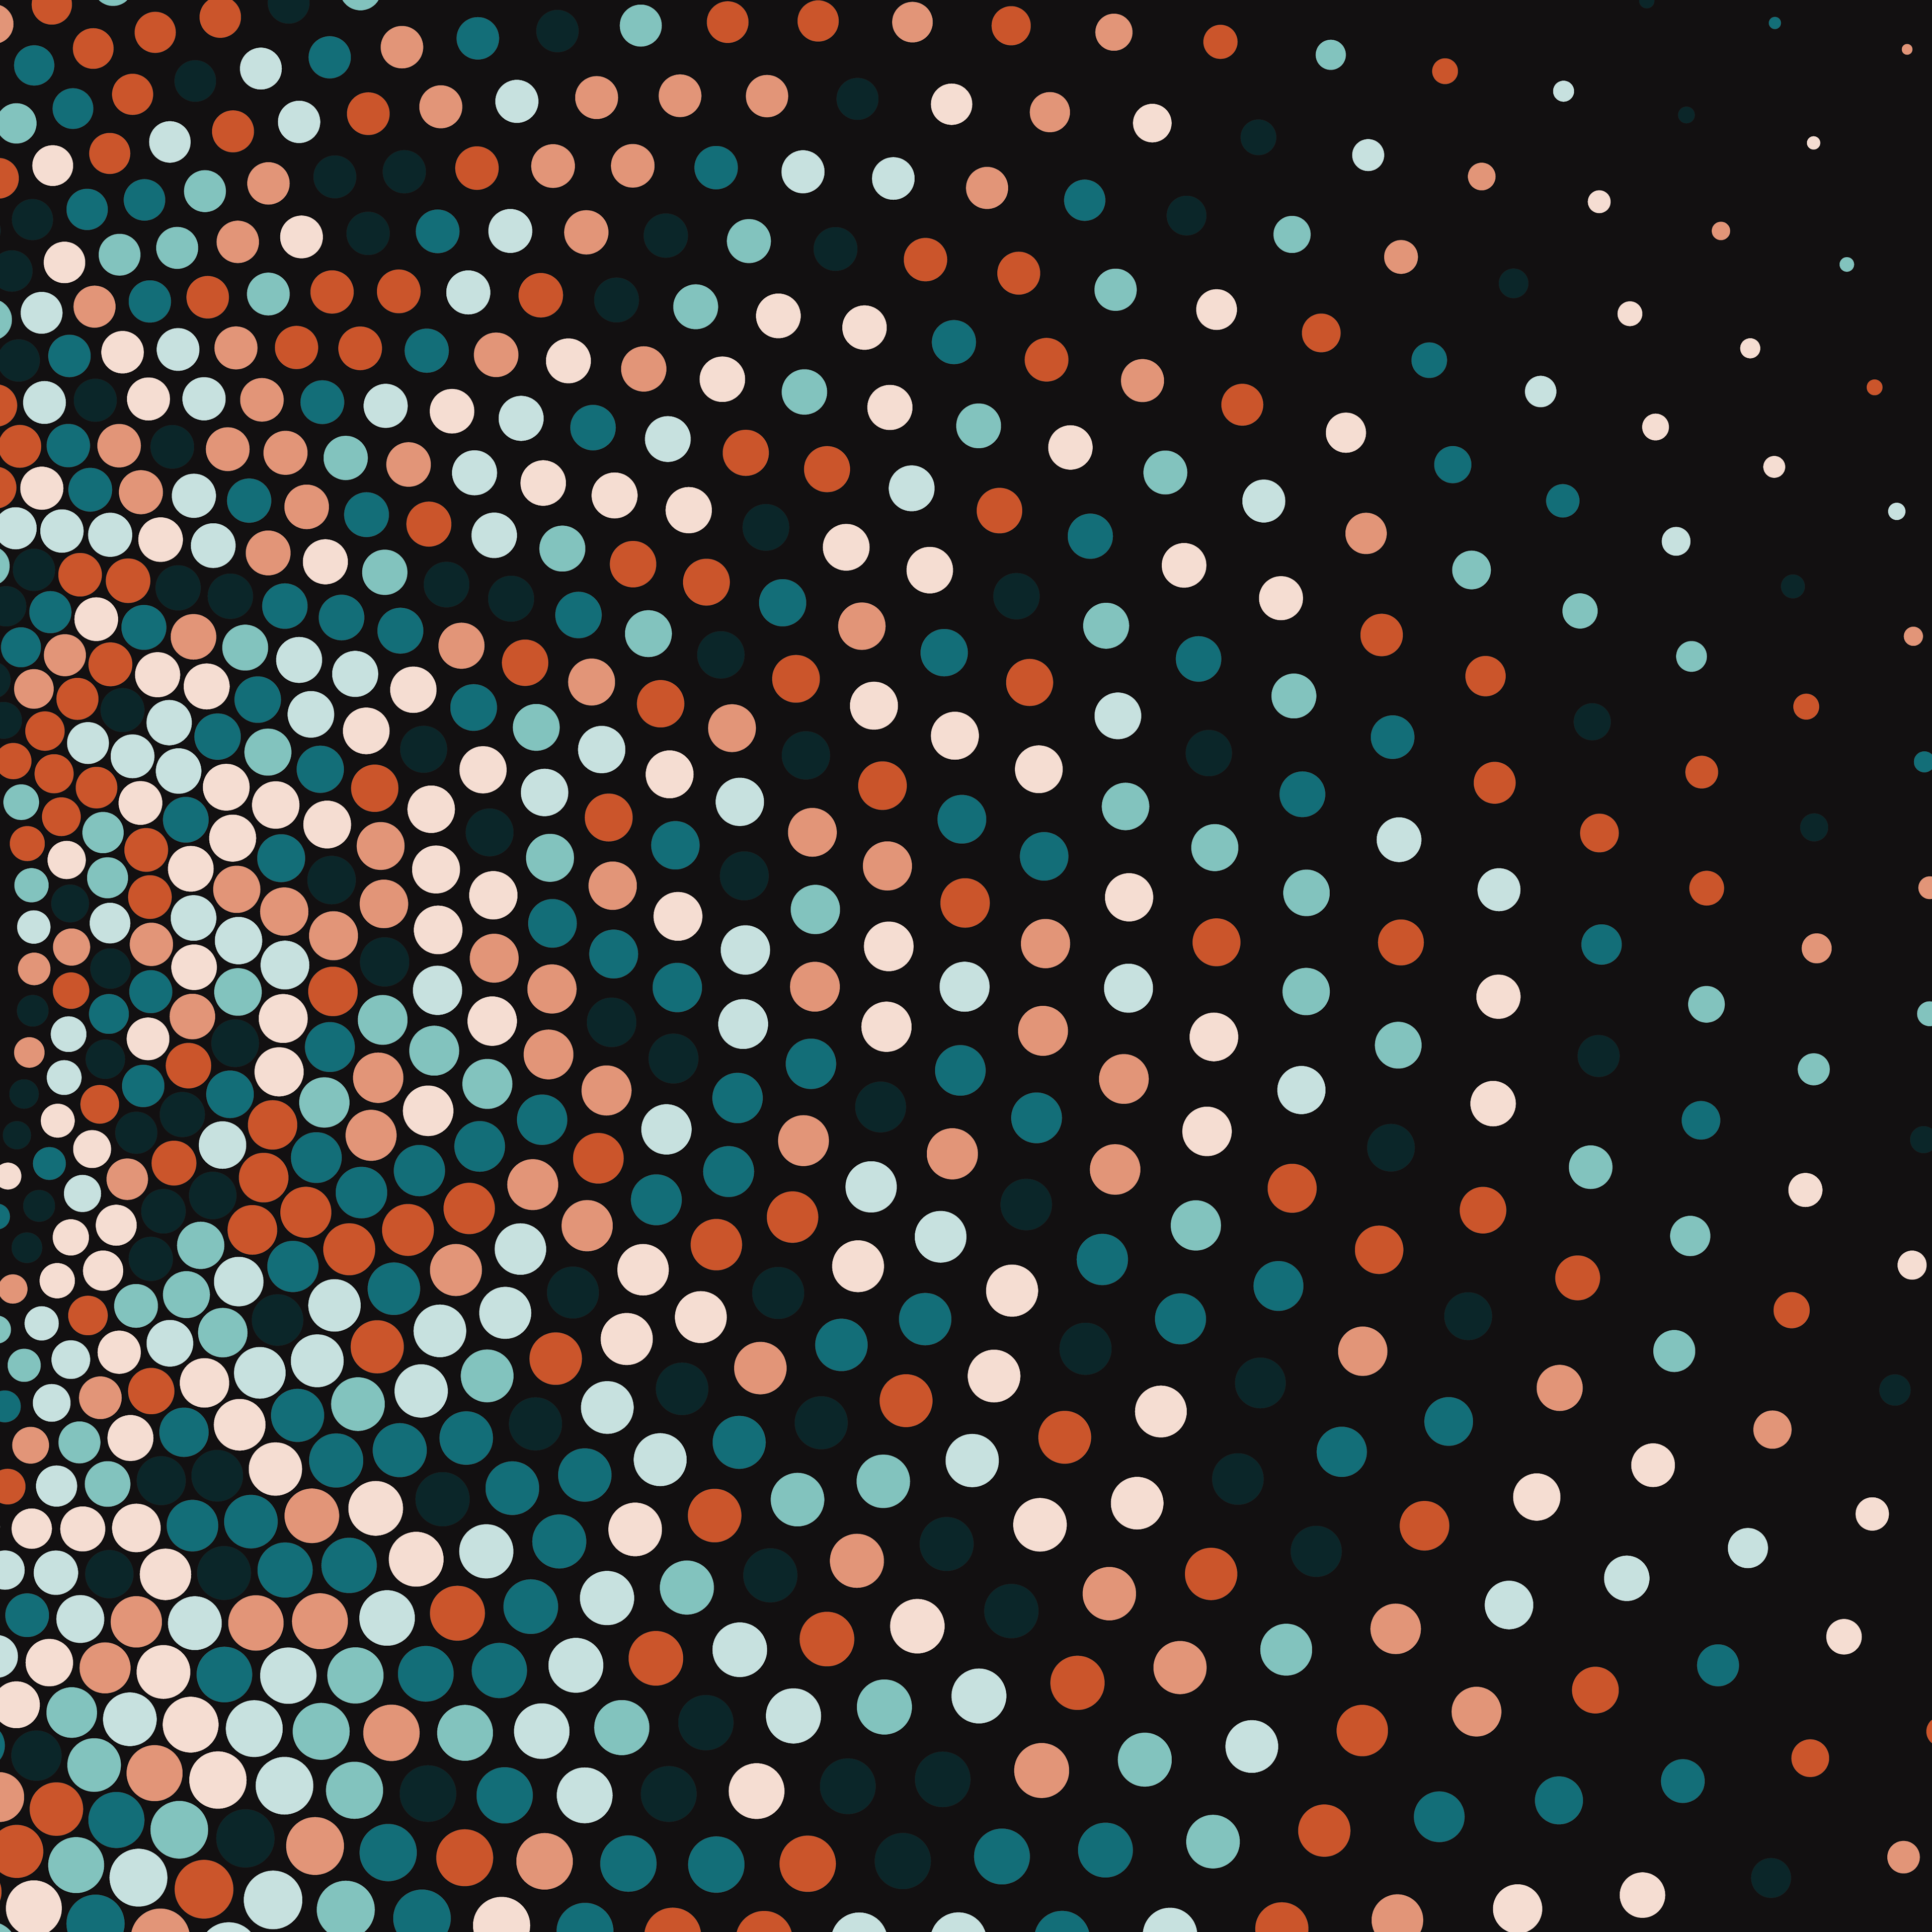 Swirling dots visual exploration by Xavier Wendling